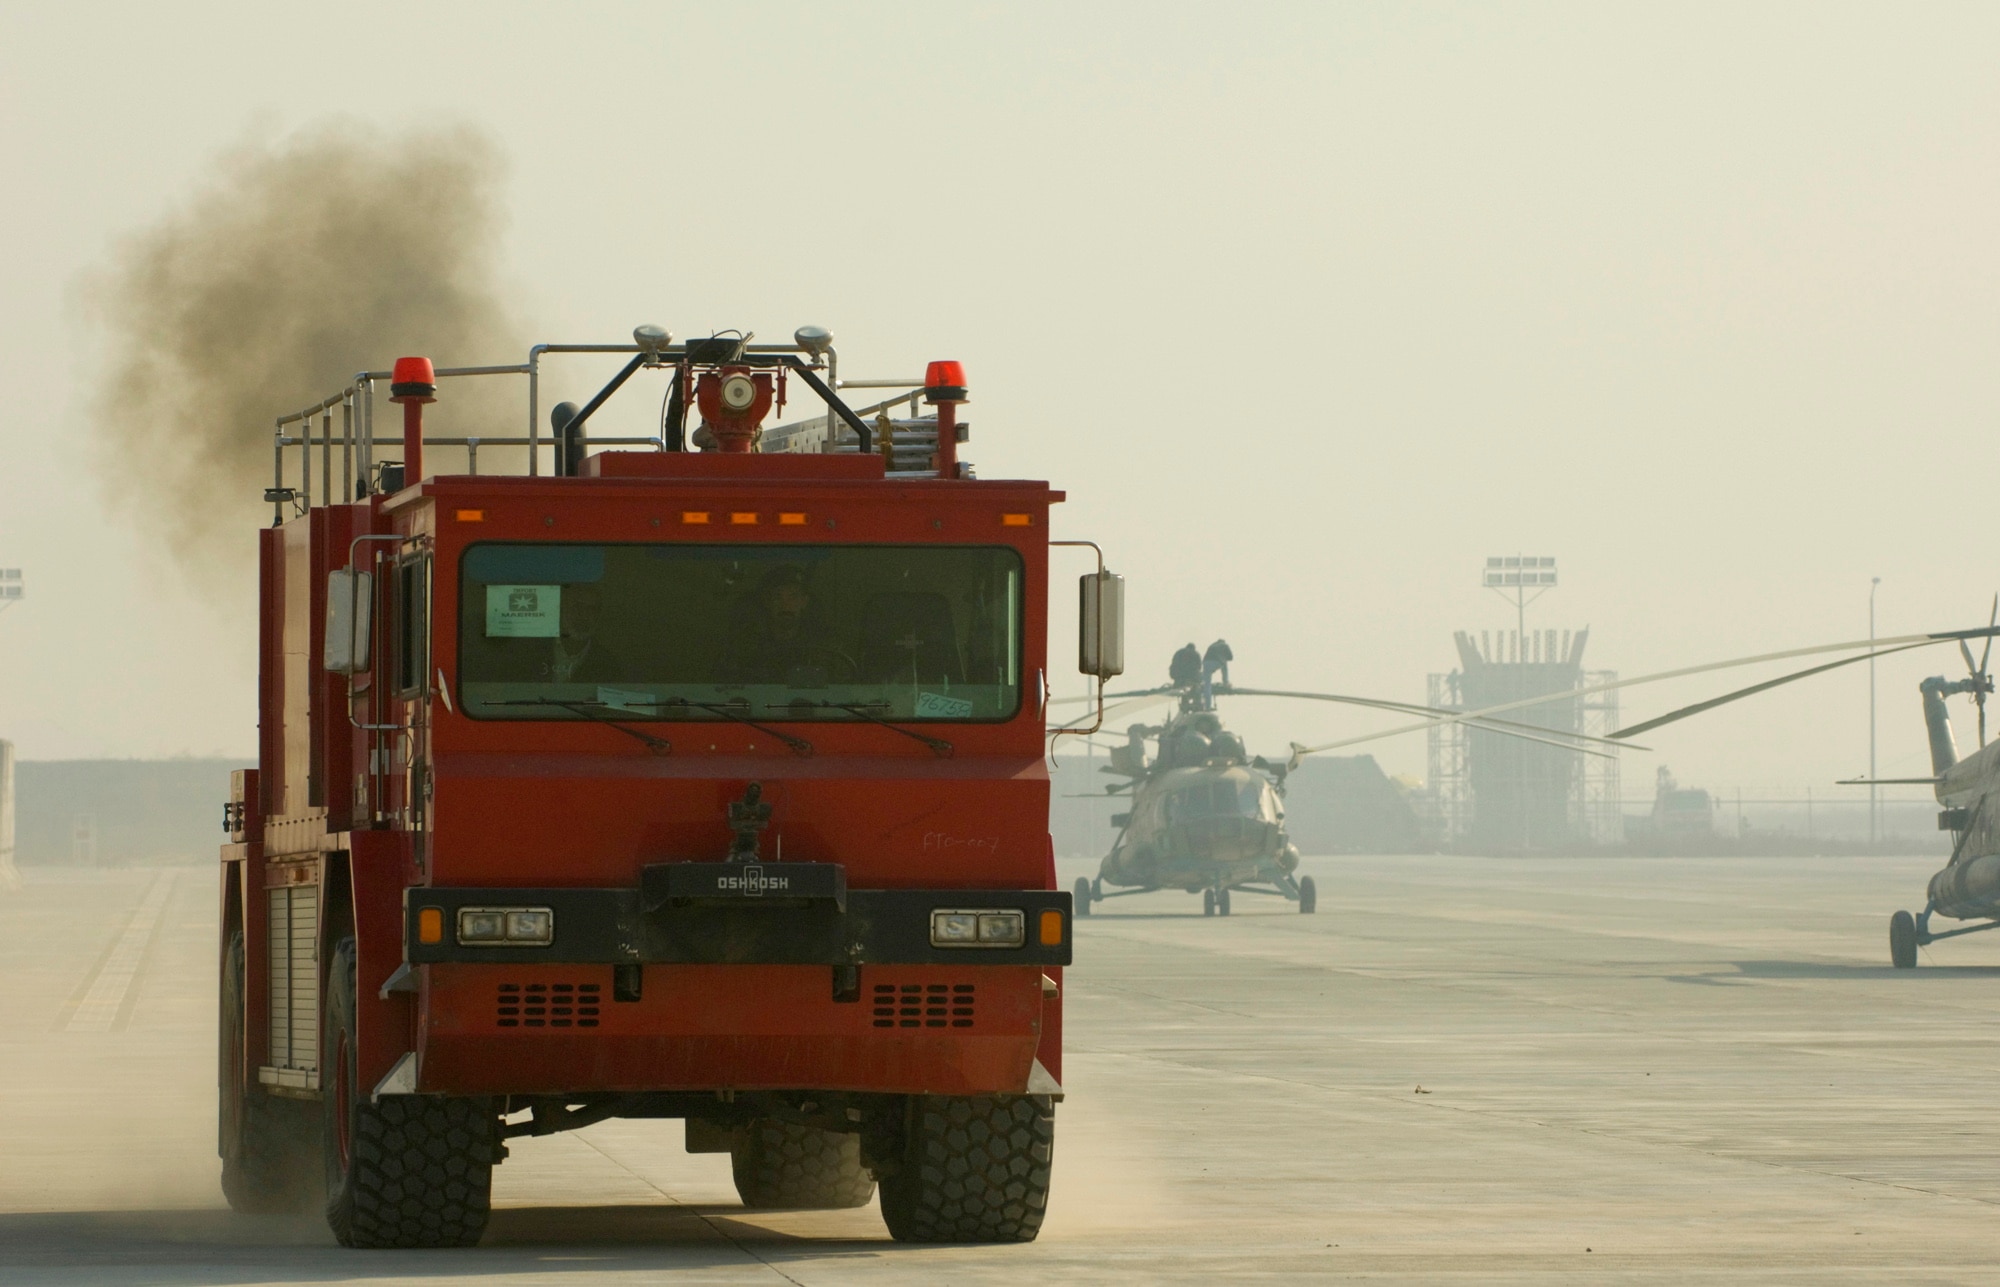 KABUL, Afghanistan -- Afghan National Army Air Corps firefighters train on driving the Osh Kosh fire truck on the flightline at Kabul International Airport. The ANAAC received seven of the fire trucks recently, which will be distributed to several bases around Afghanistan. (U.S. Air Force photo/Master Sgt. Keith Brown)